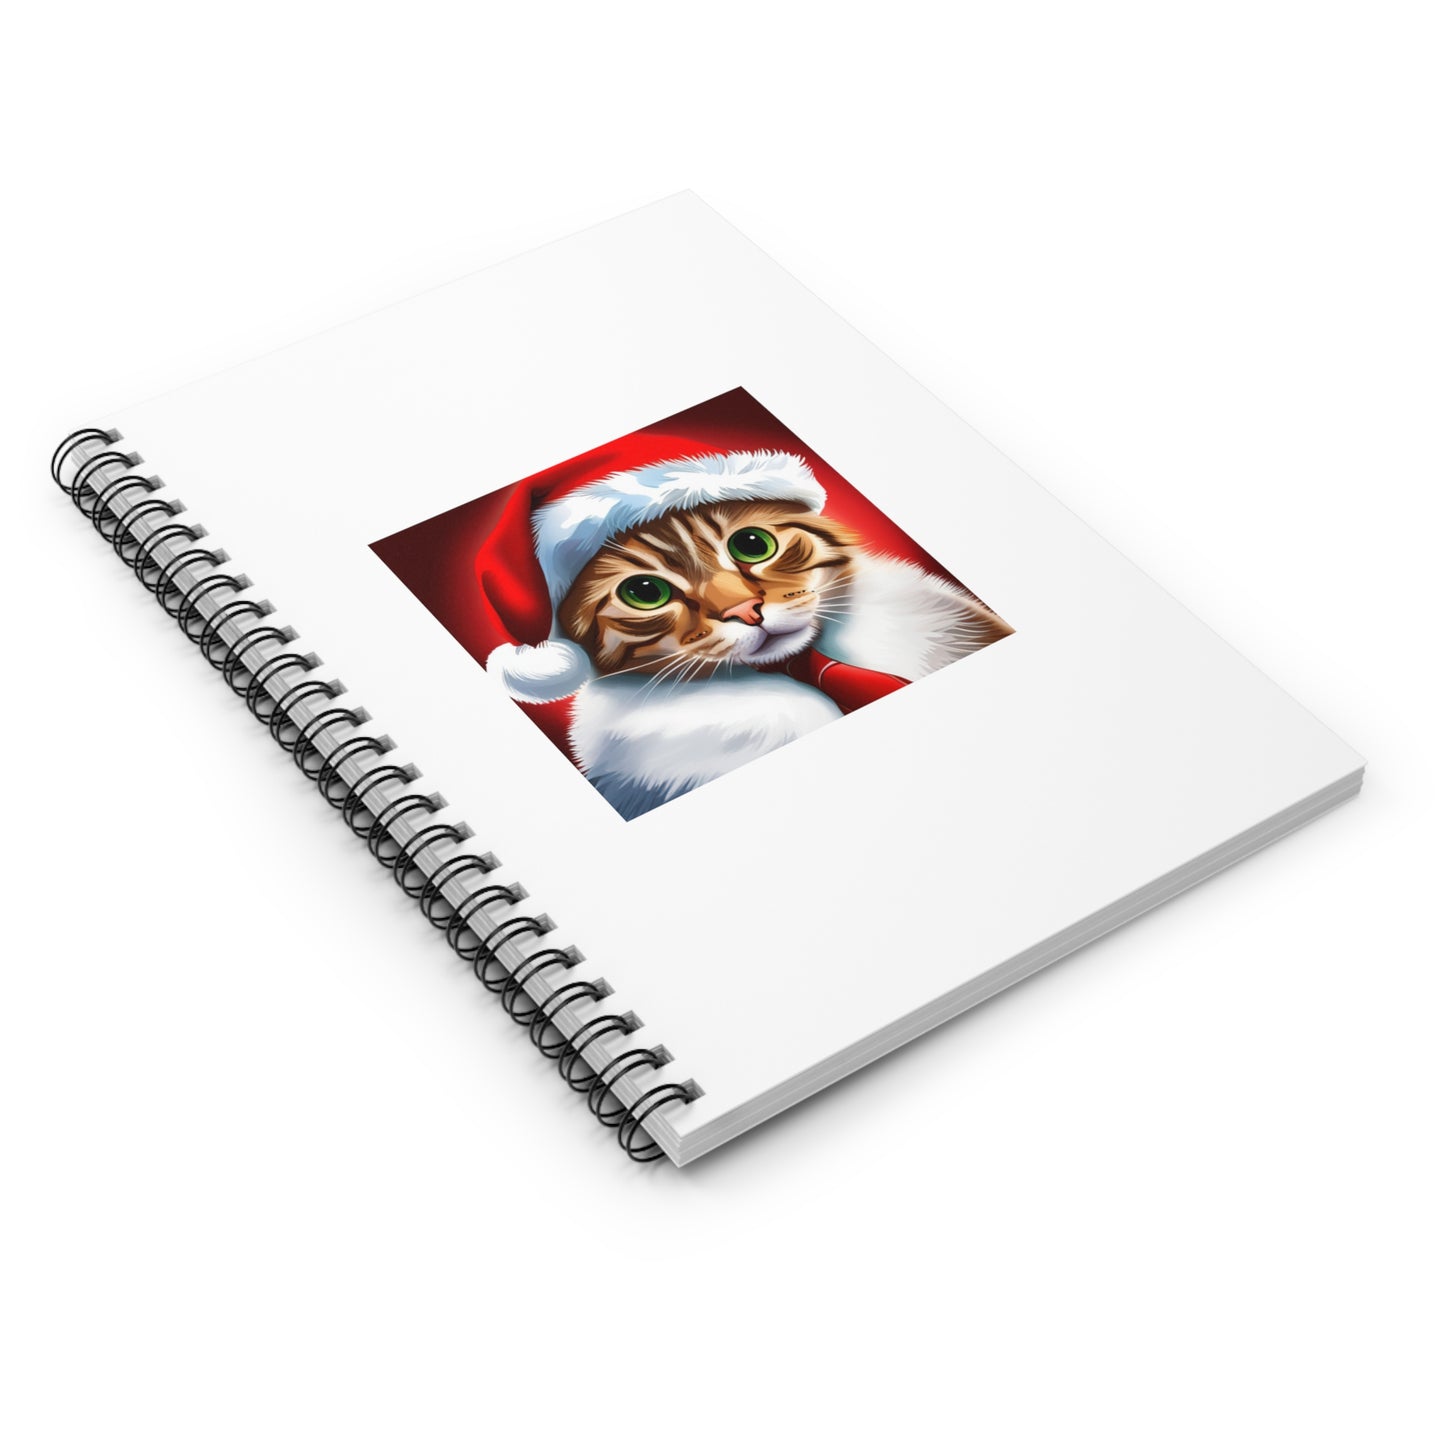 Christmas Cat Spiral Notebook - Ruled Line